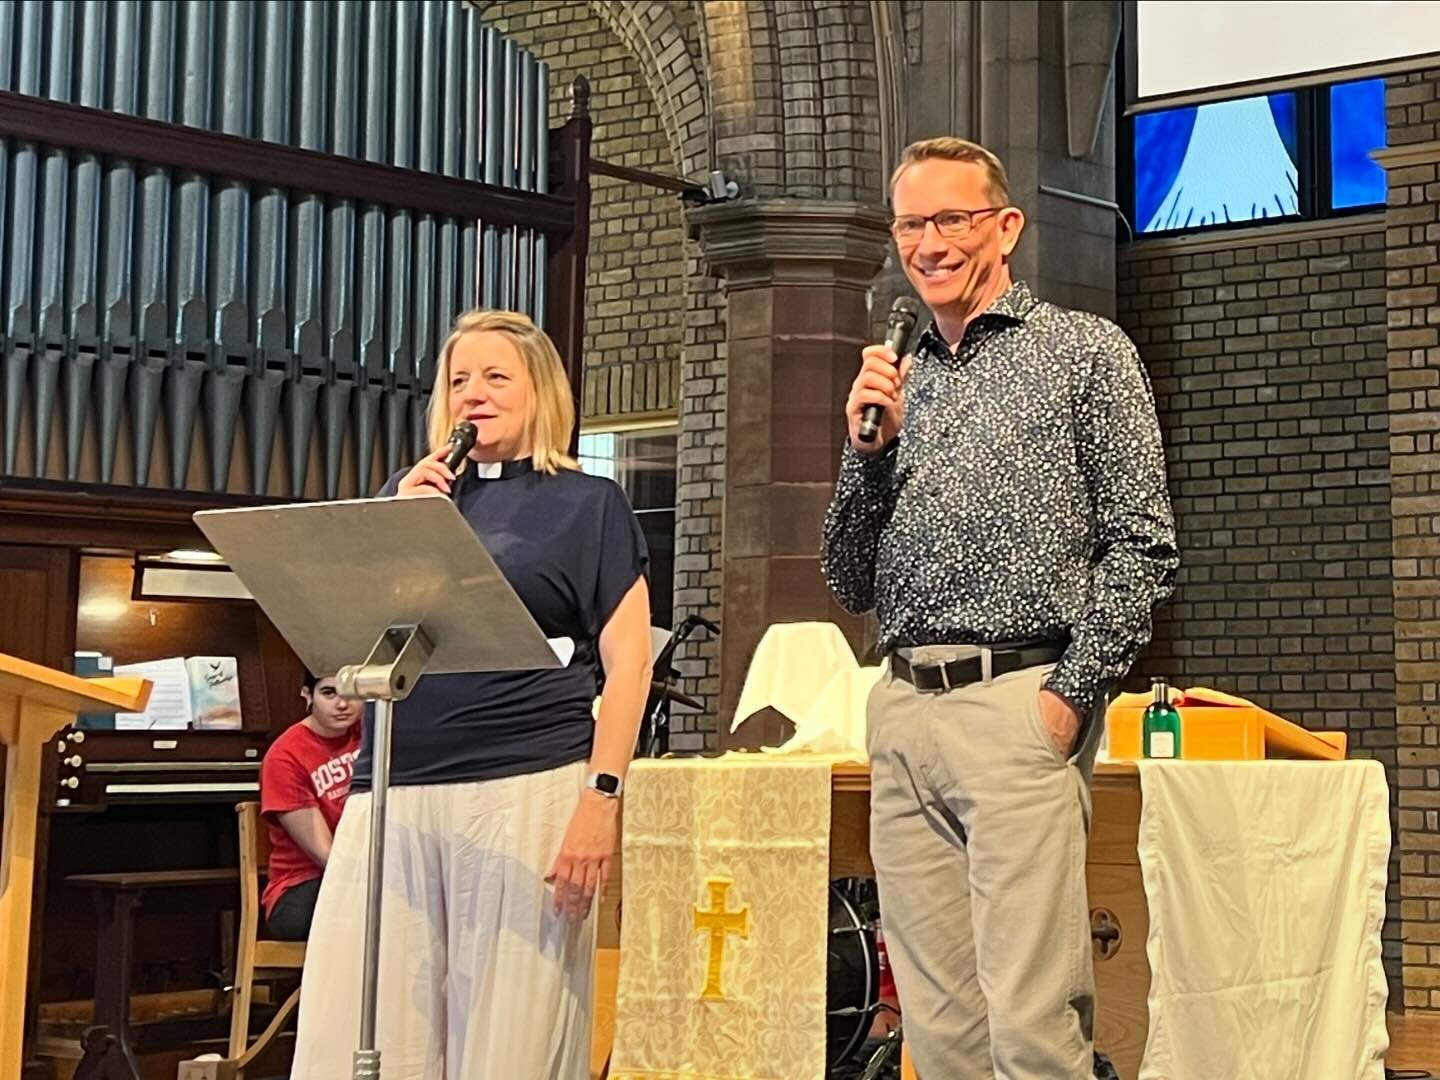 Powerful sermon from David Gotts from International China Concern (ICC), our Mission Partner, yesterday. ICC do incredible work trying to ensure children with disabilities in China are embraced by love, hope and are empowered to thrive. You can liste